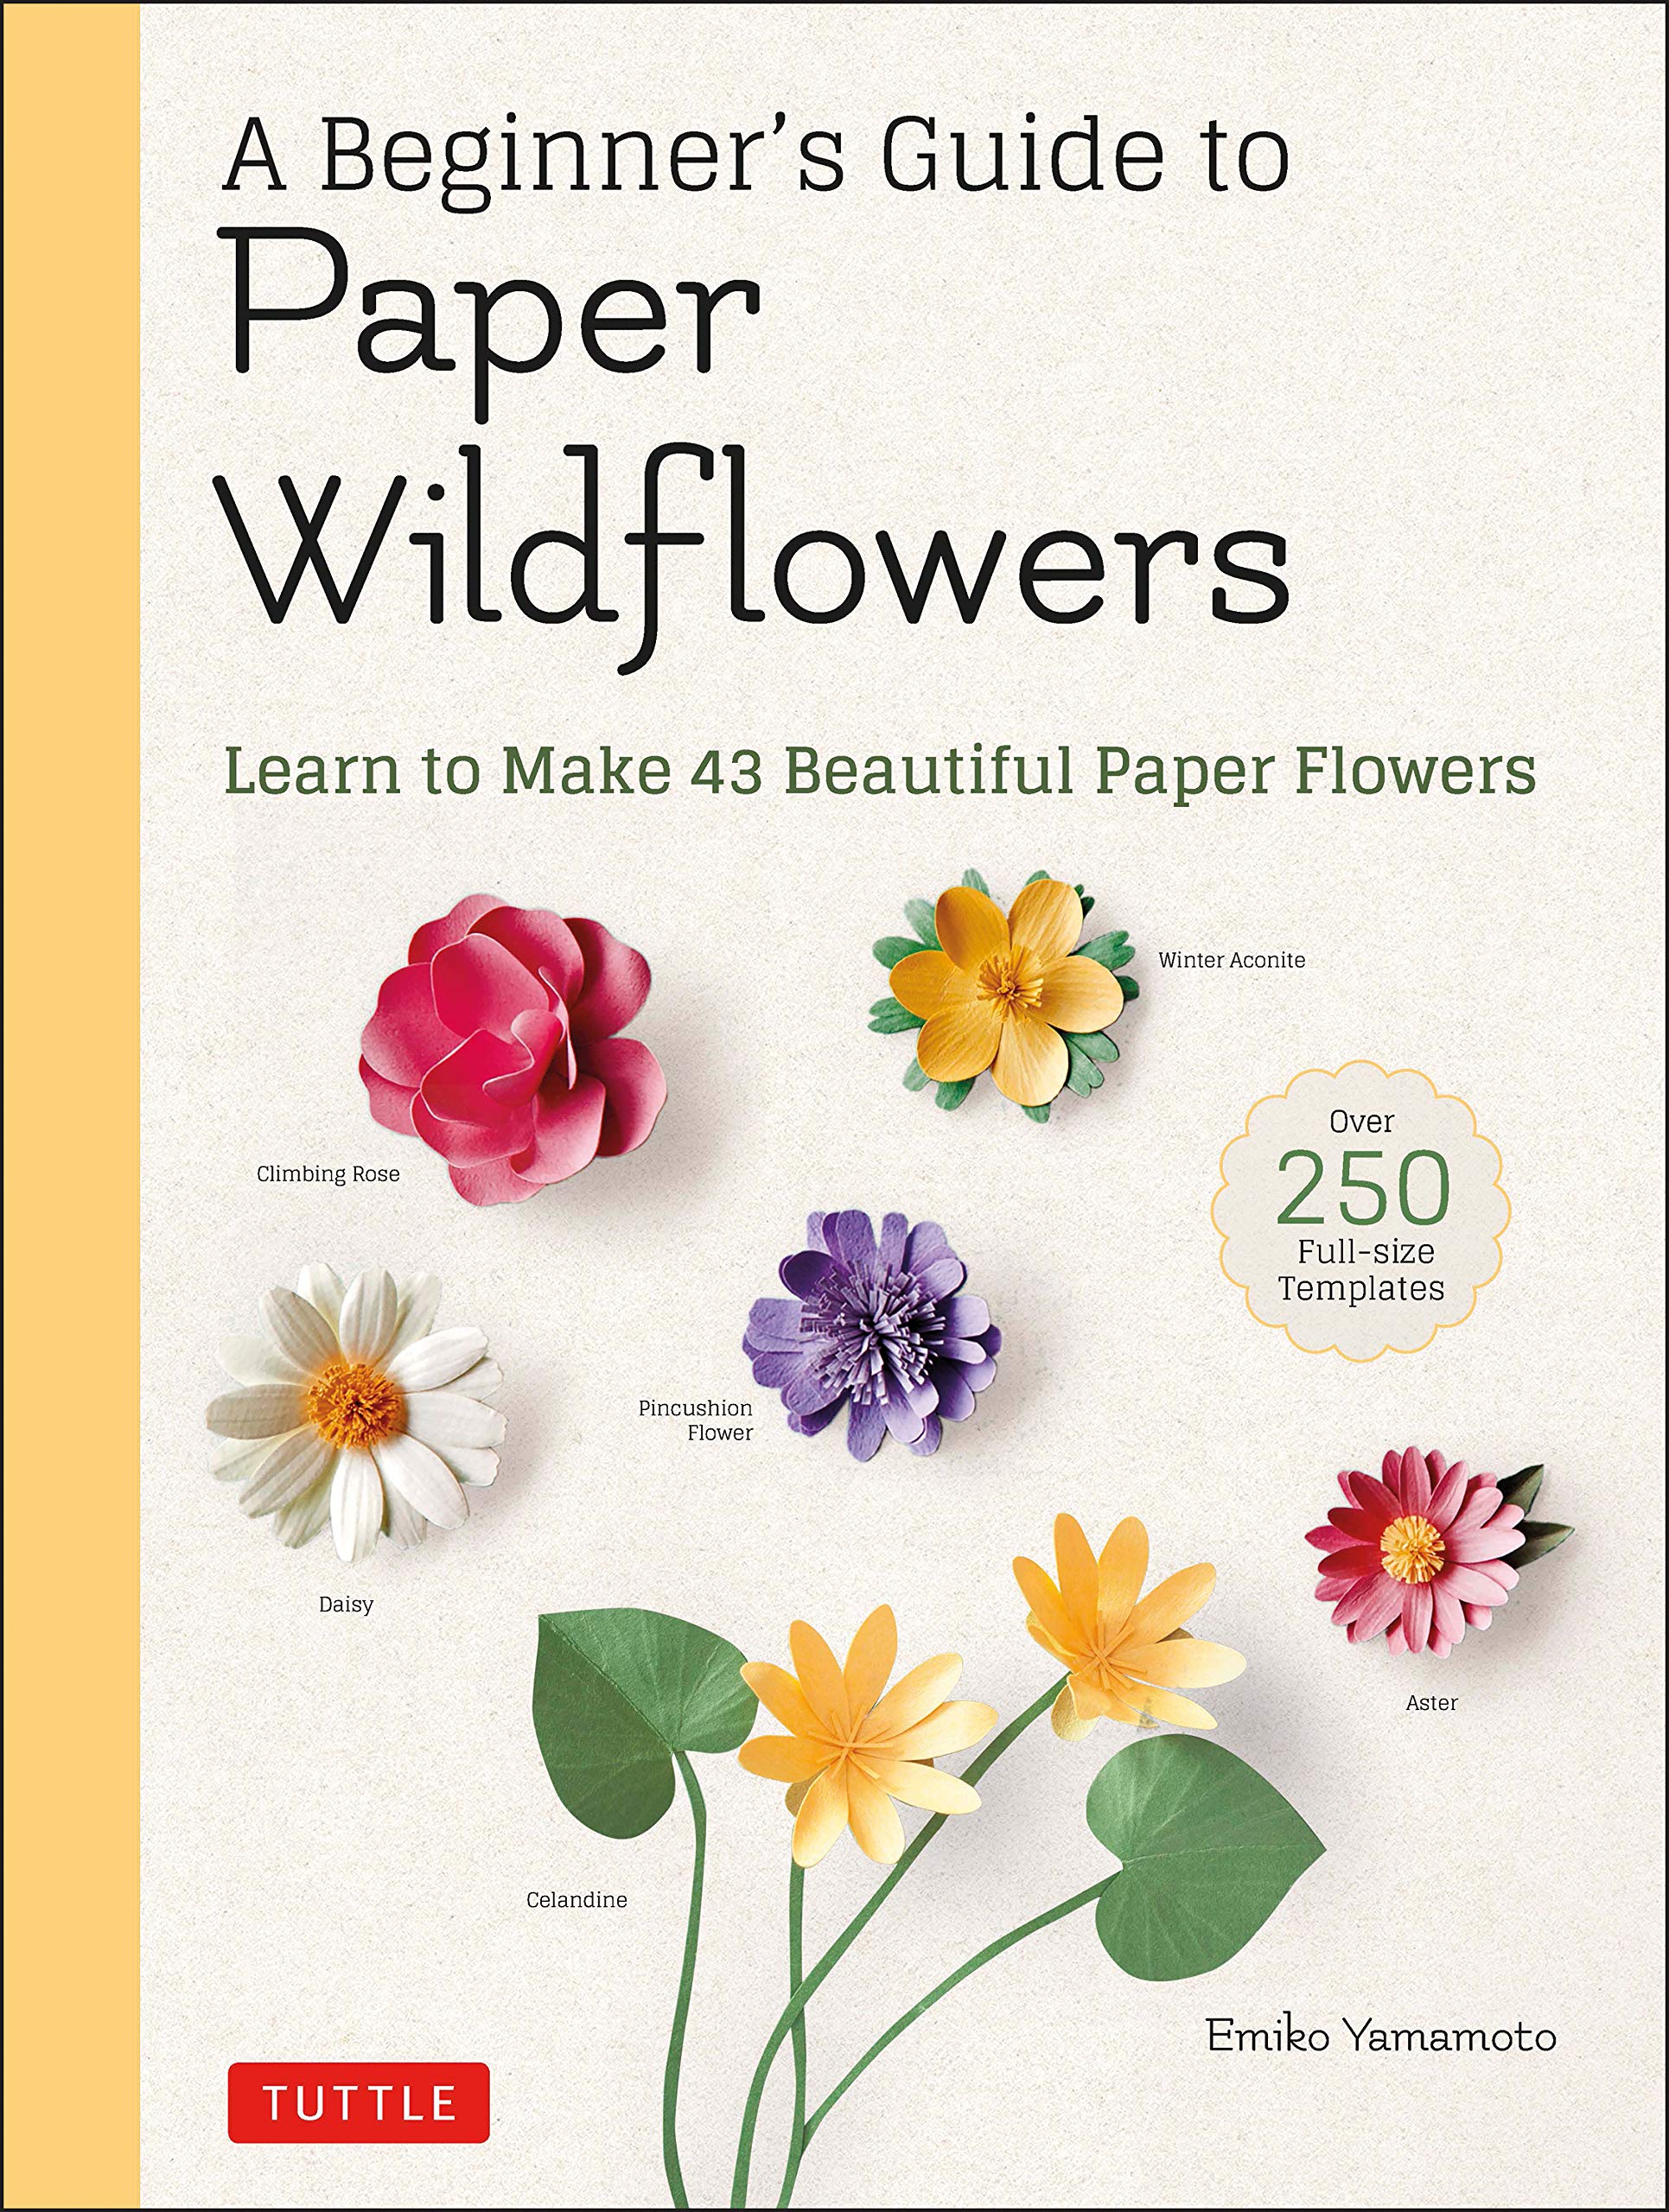 A Beginner's Guide to Paper Wildflowers | Emiko Yamamoto image0